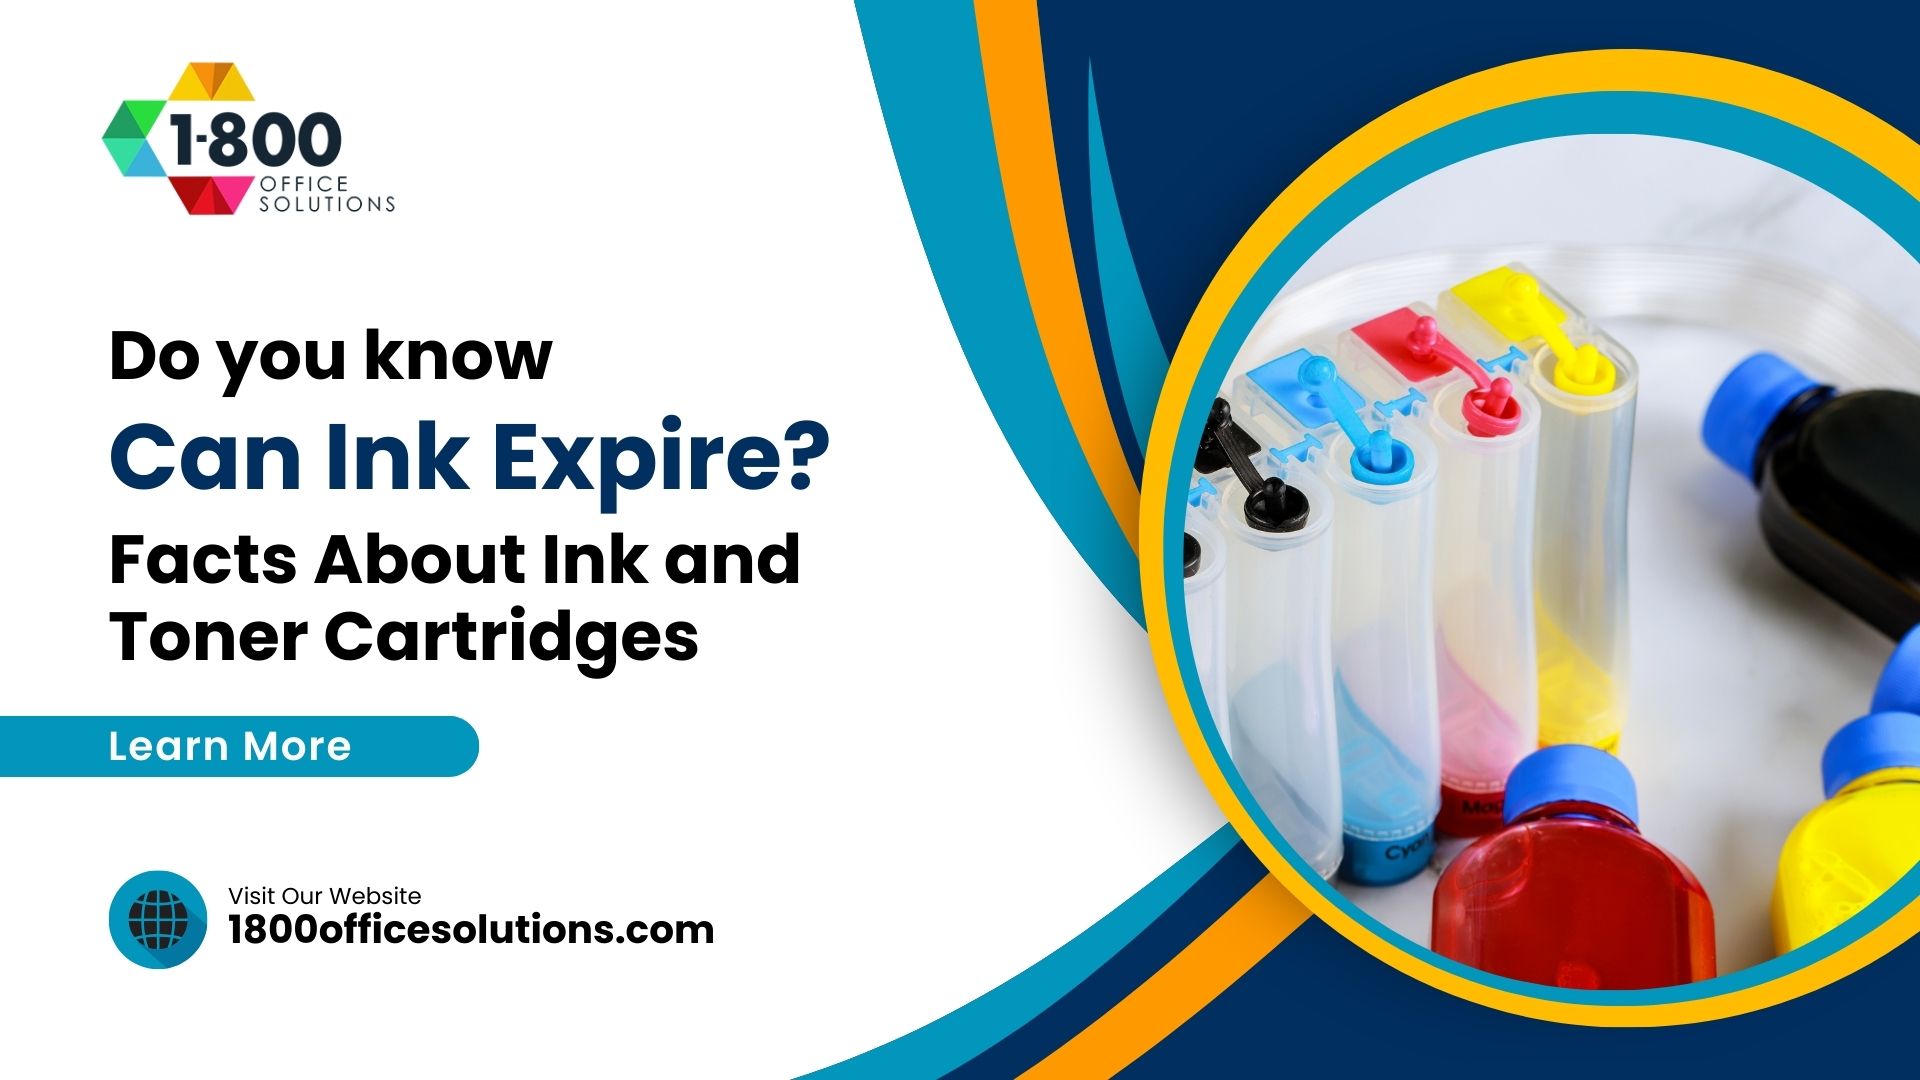 Can Ink Expire? The Facts About Ink and Toner Cartridges